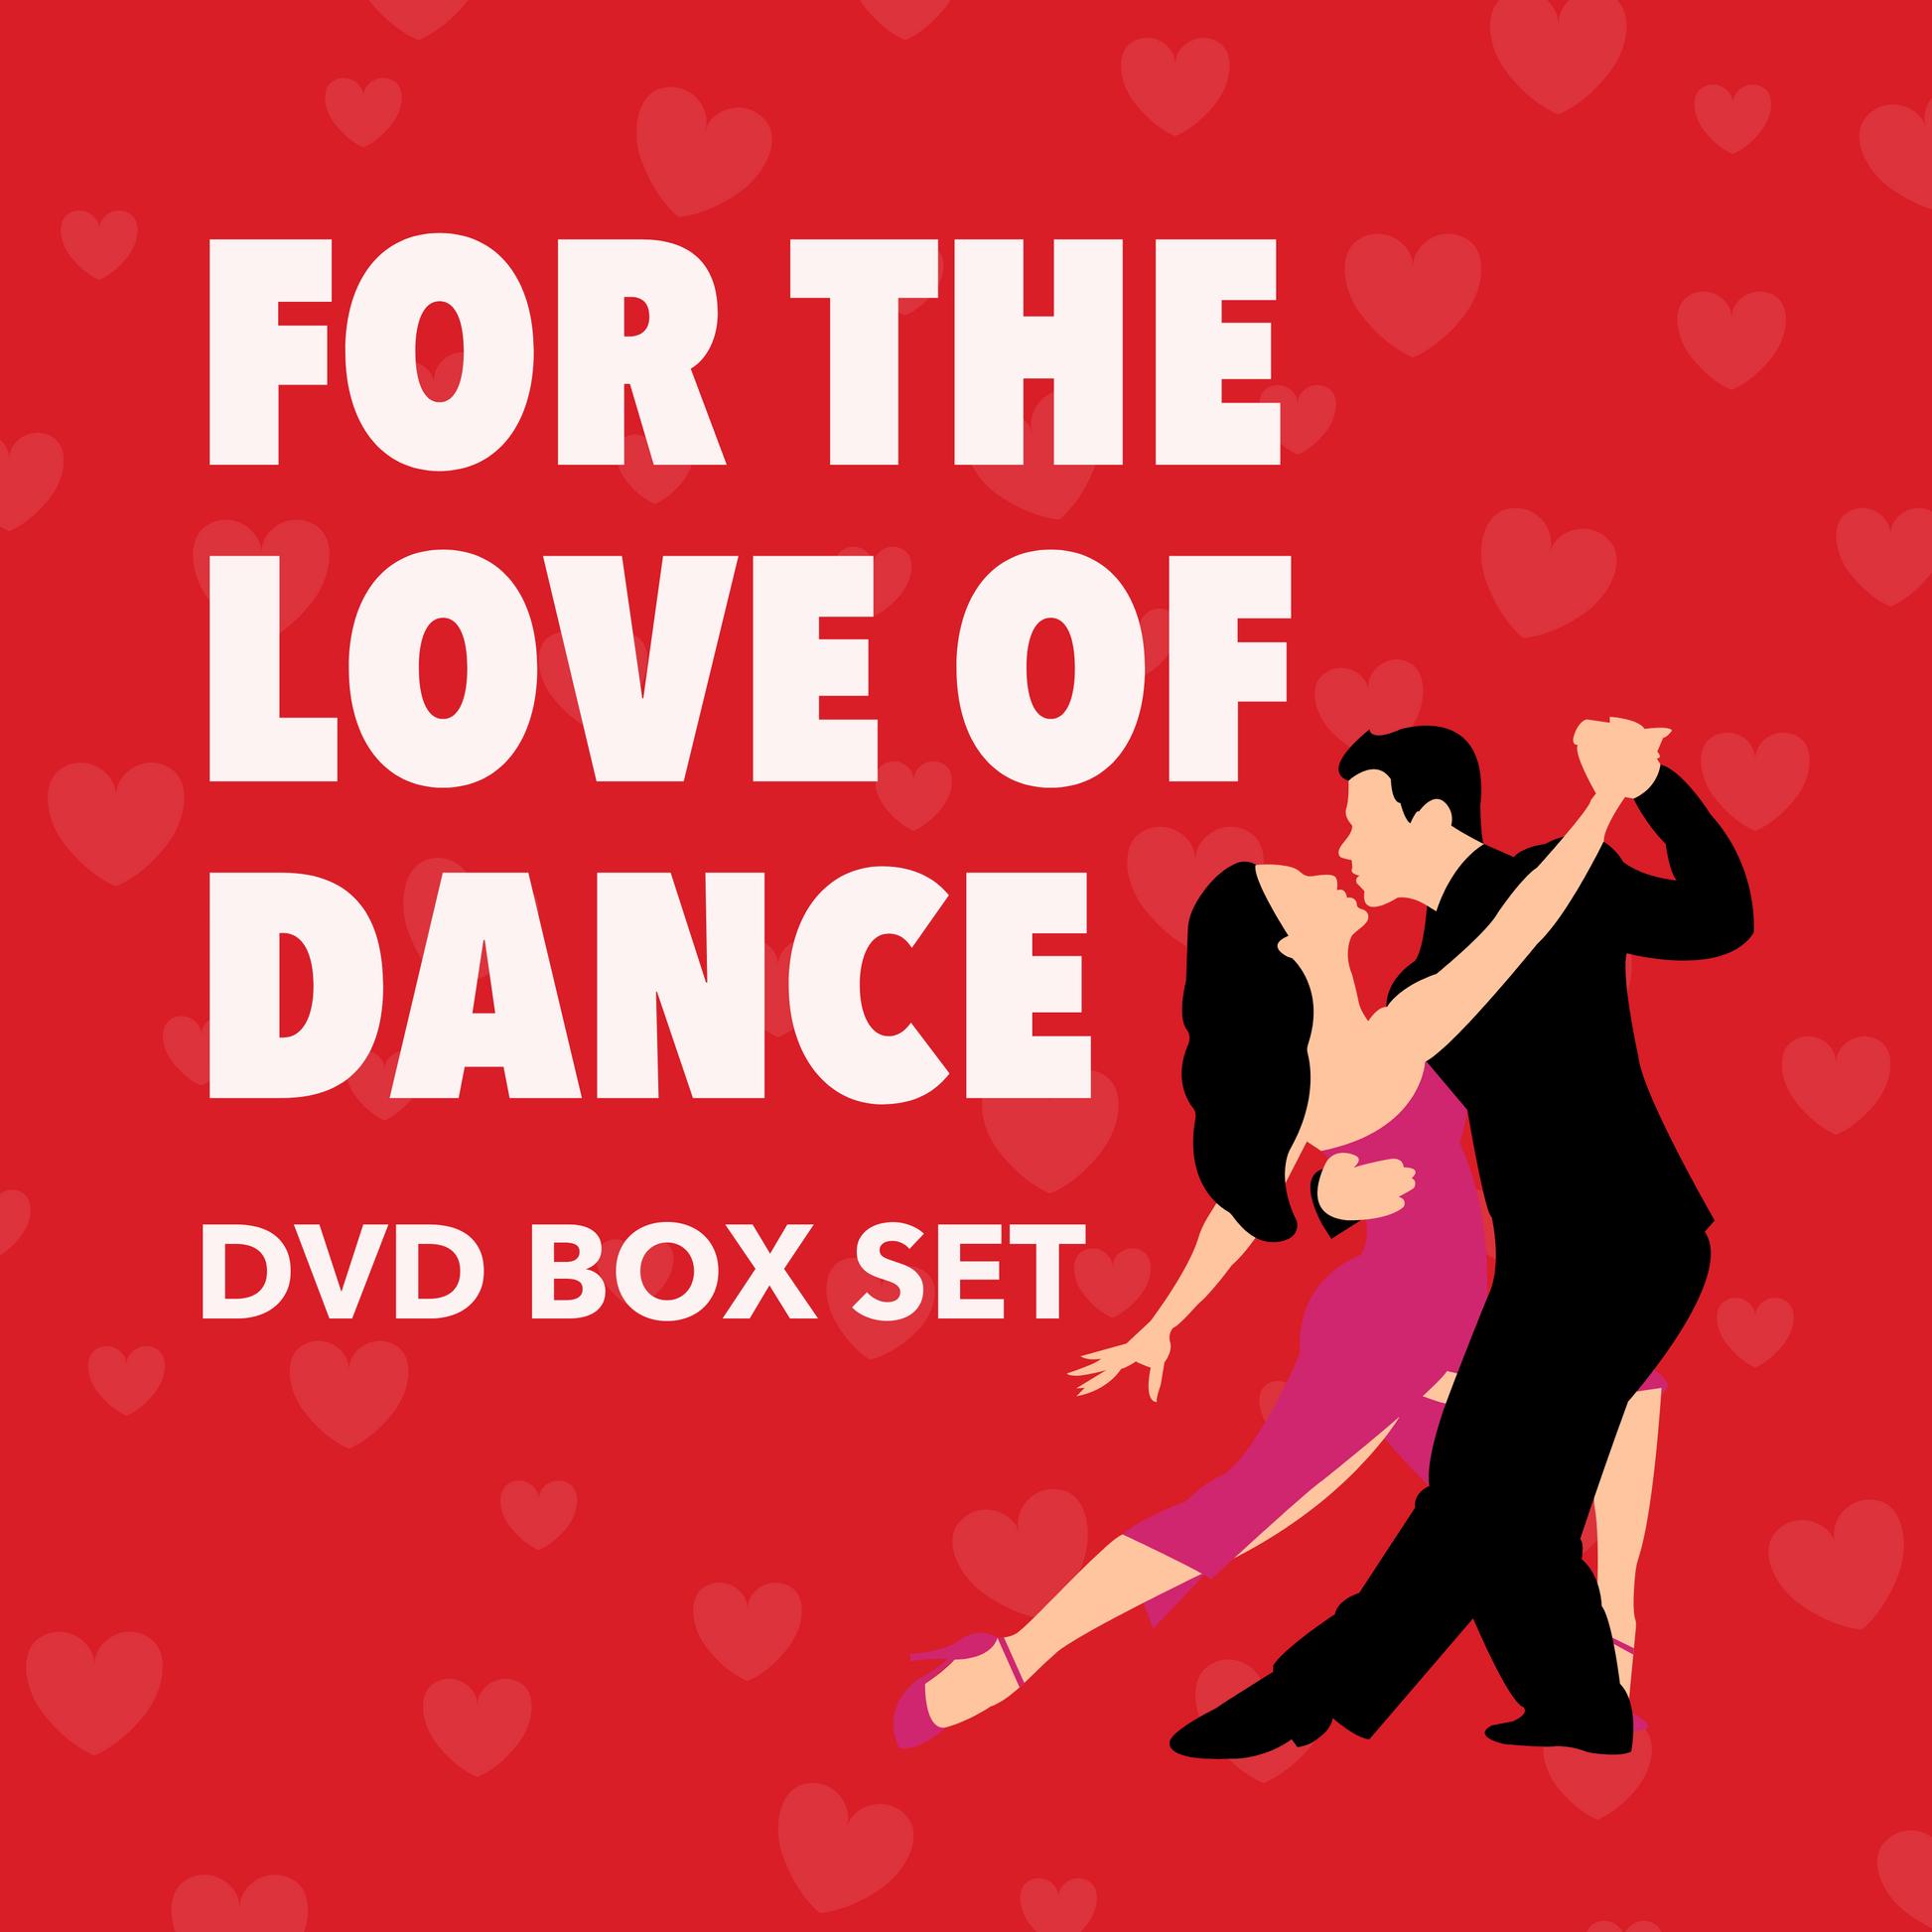 For the Love of Dance Argentine Tango DVD Box Set. Includes 9 DVDs. 